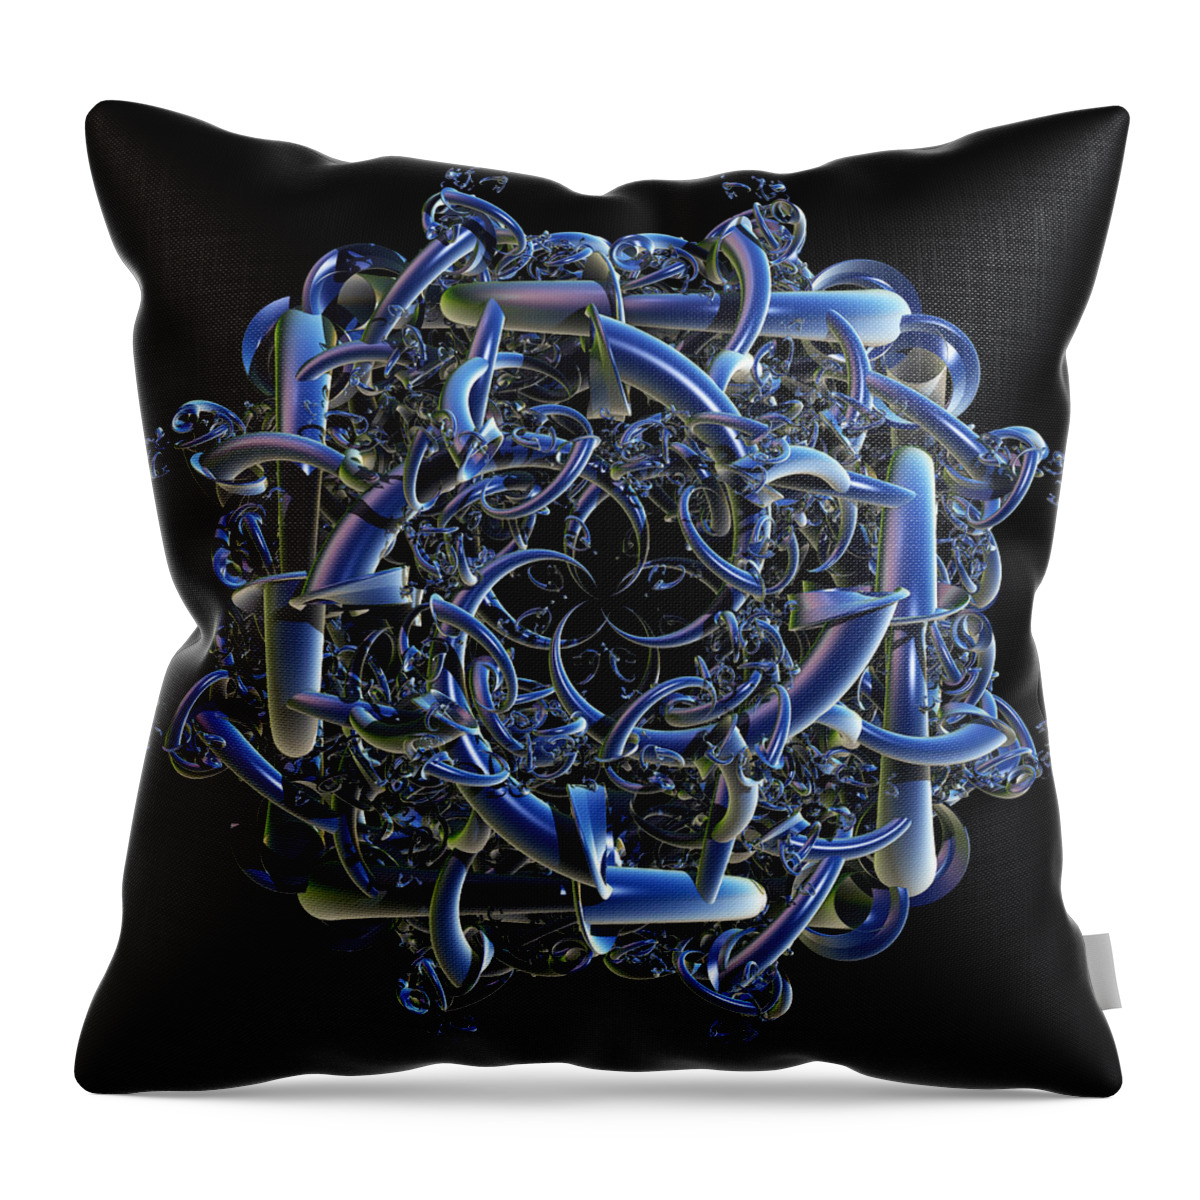 Fractal Throw Pillow featuring the digital art Fractal complicated Intertwined Emblem by Nicholas Burningham